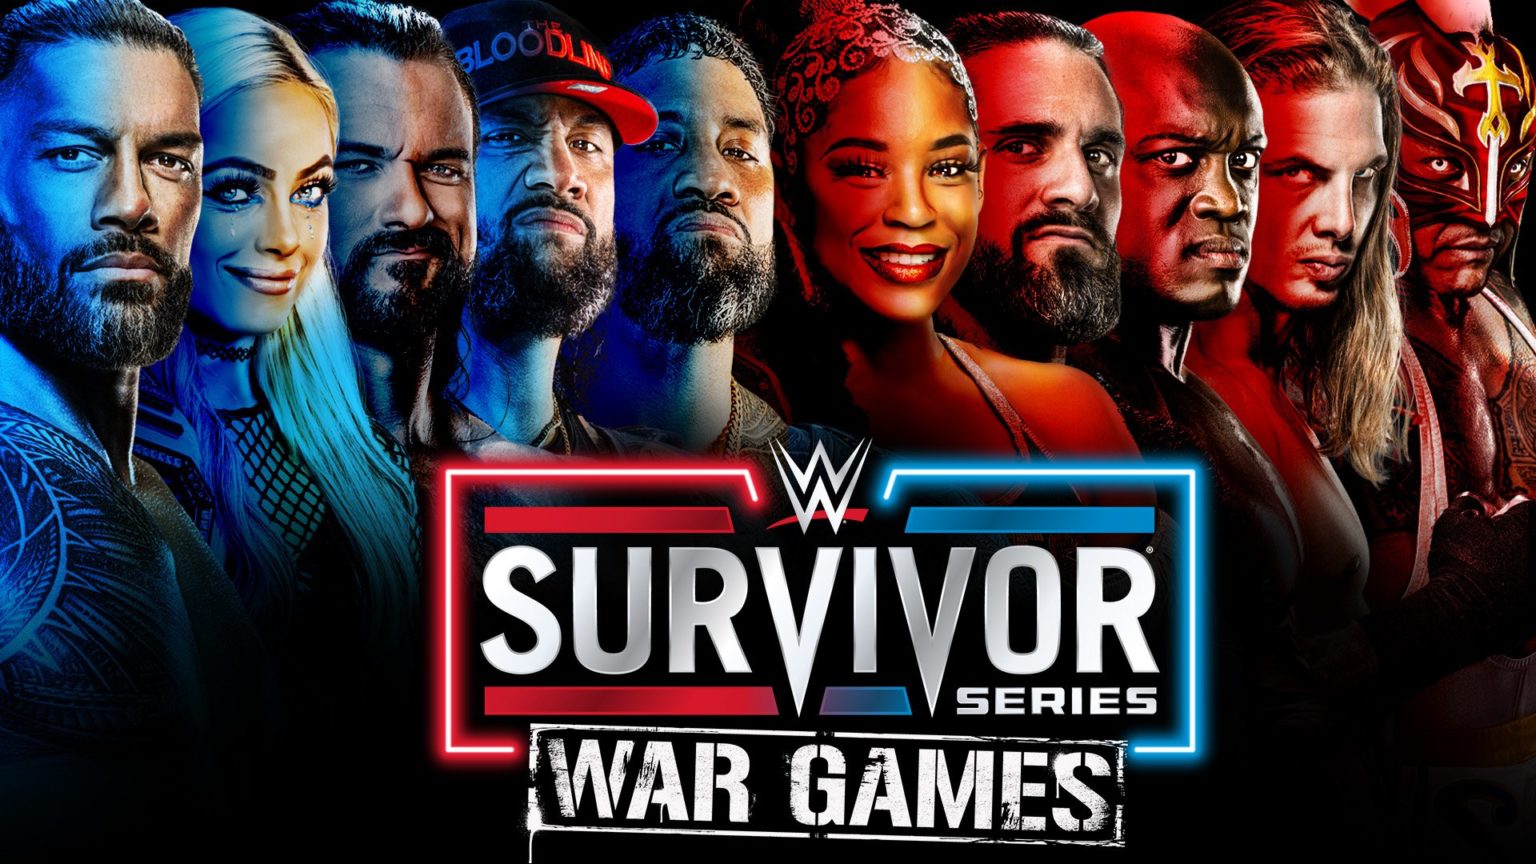 WWE Survivor Series WarGames 2022 Review and Match Ratings